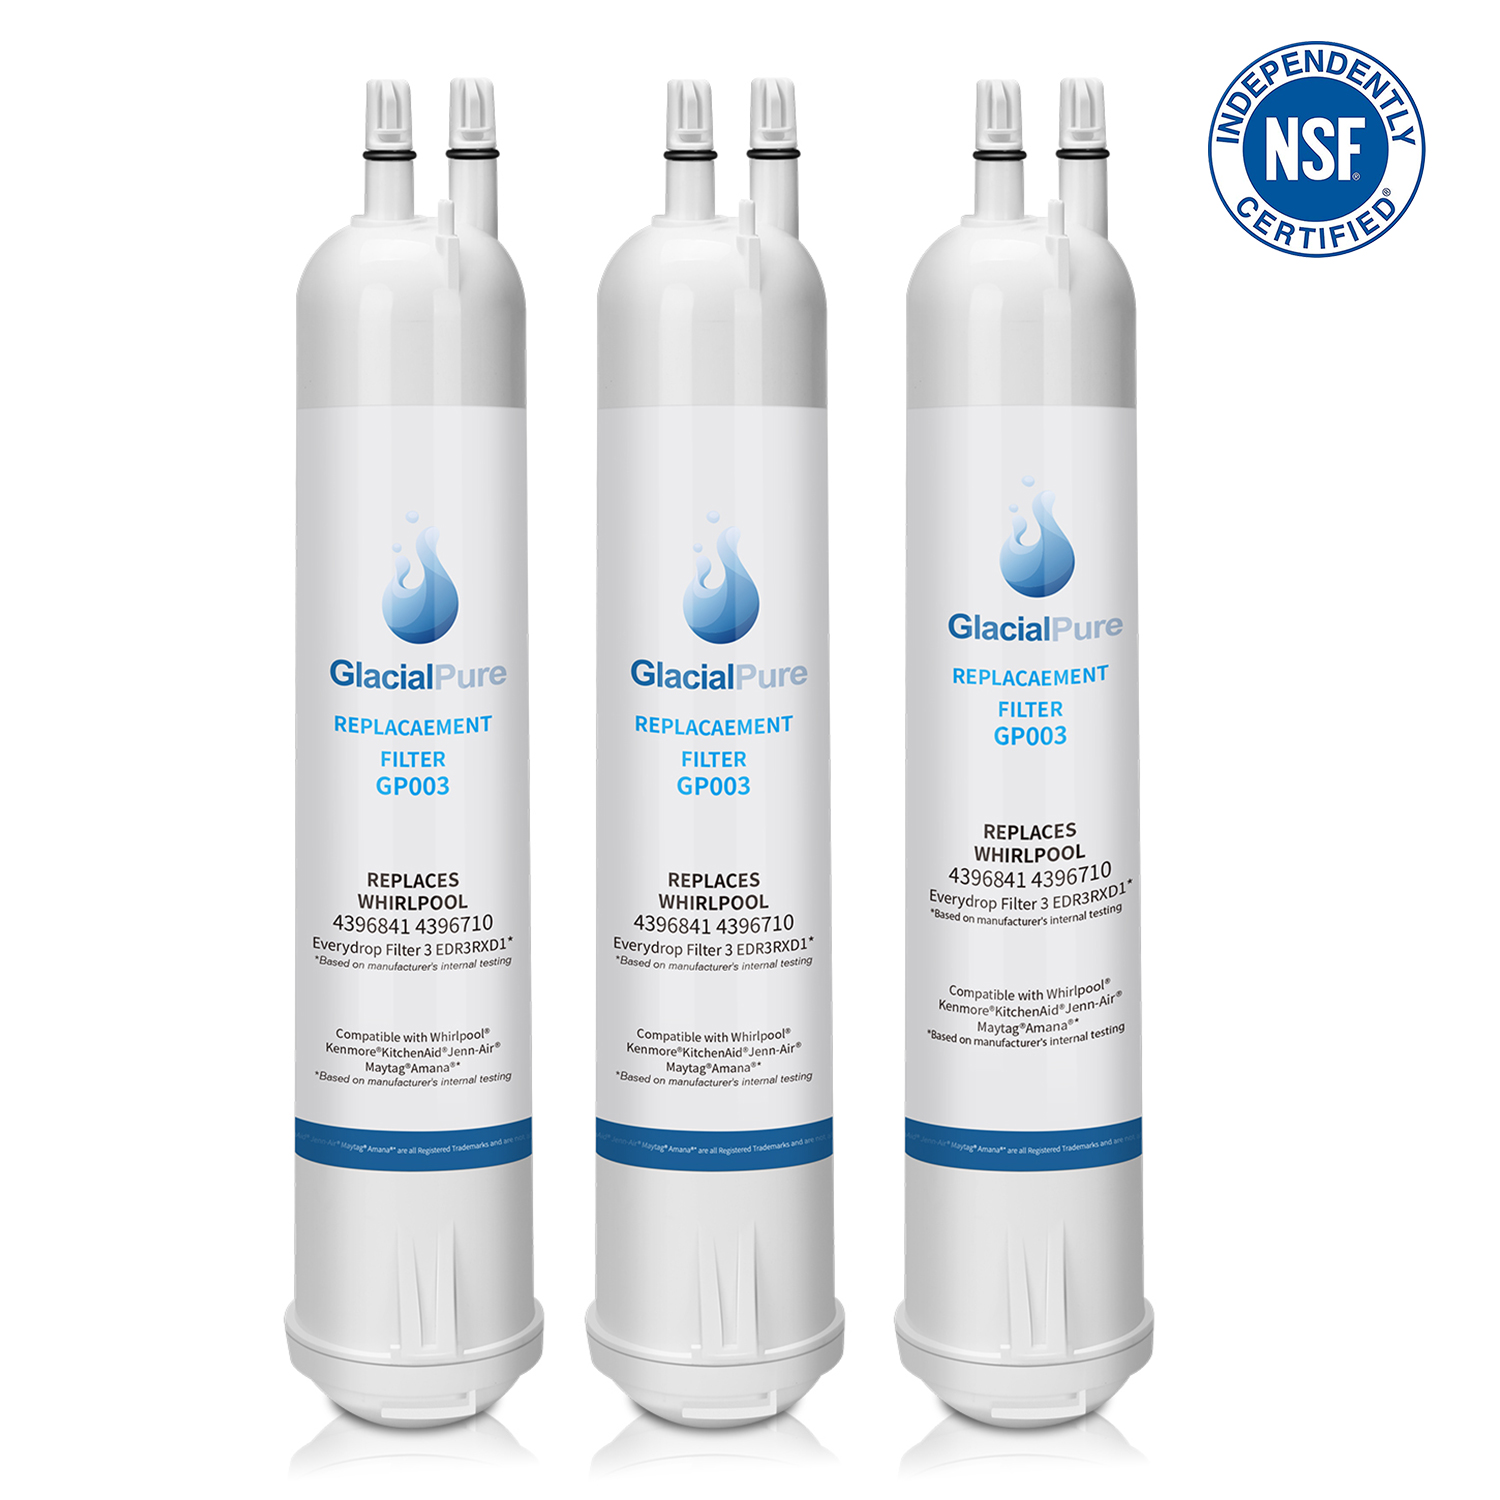 Whirlpool Refrigerator Water Filter 3 EDR3RXD1 , Pur Filter 3